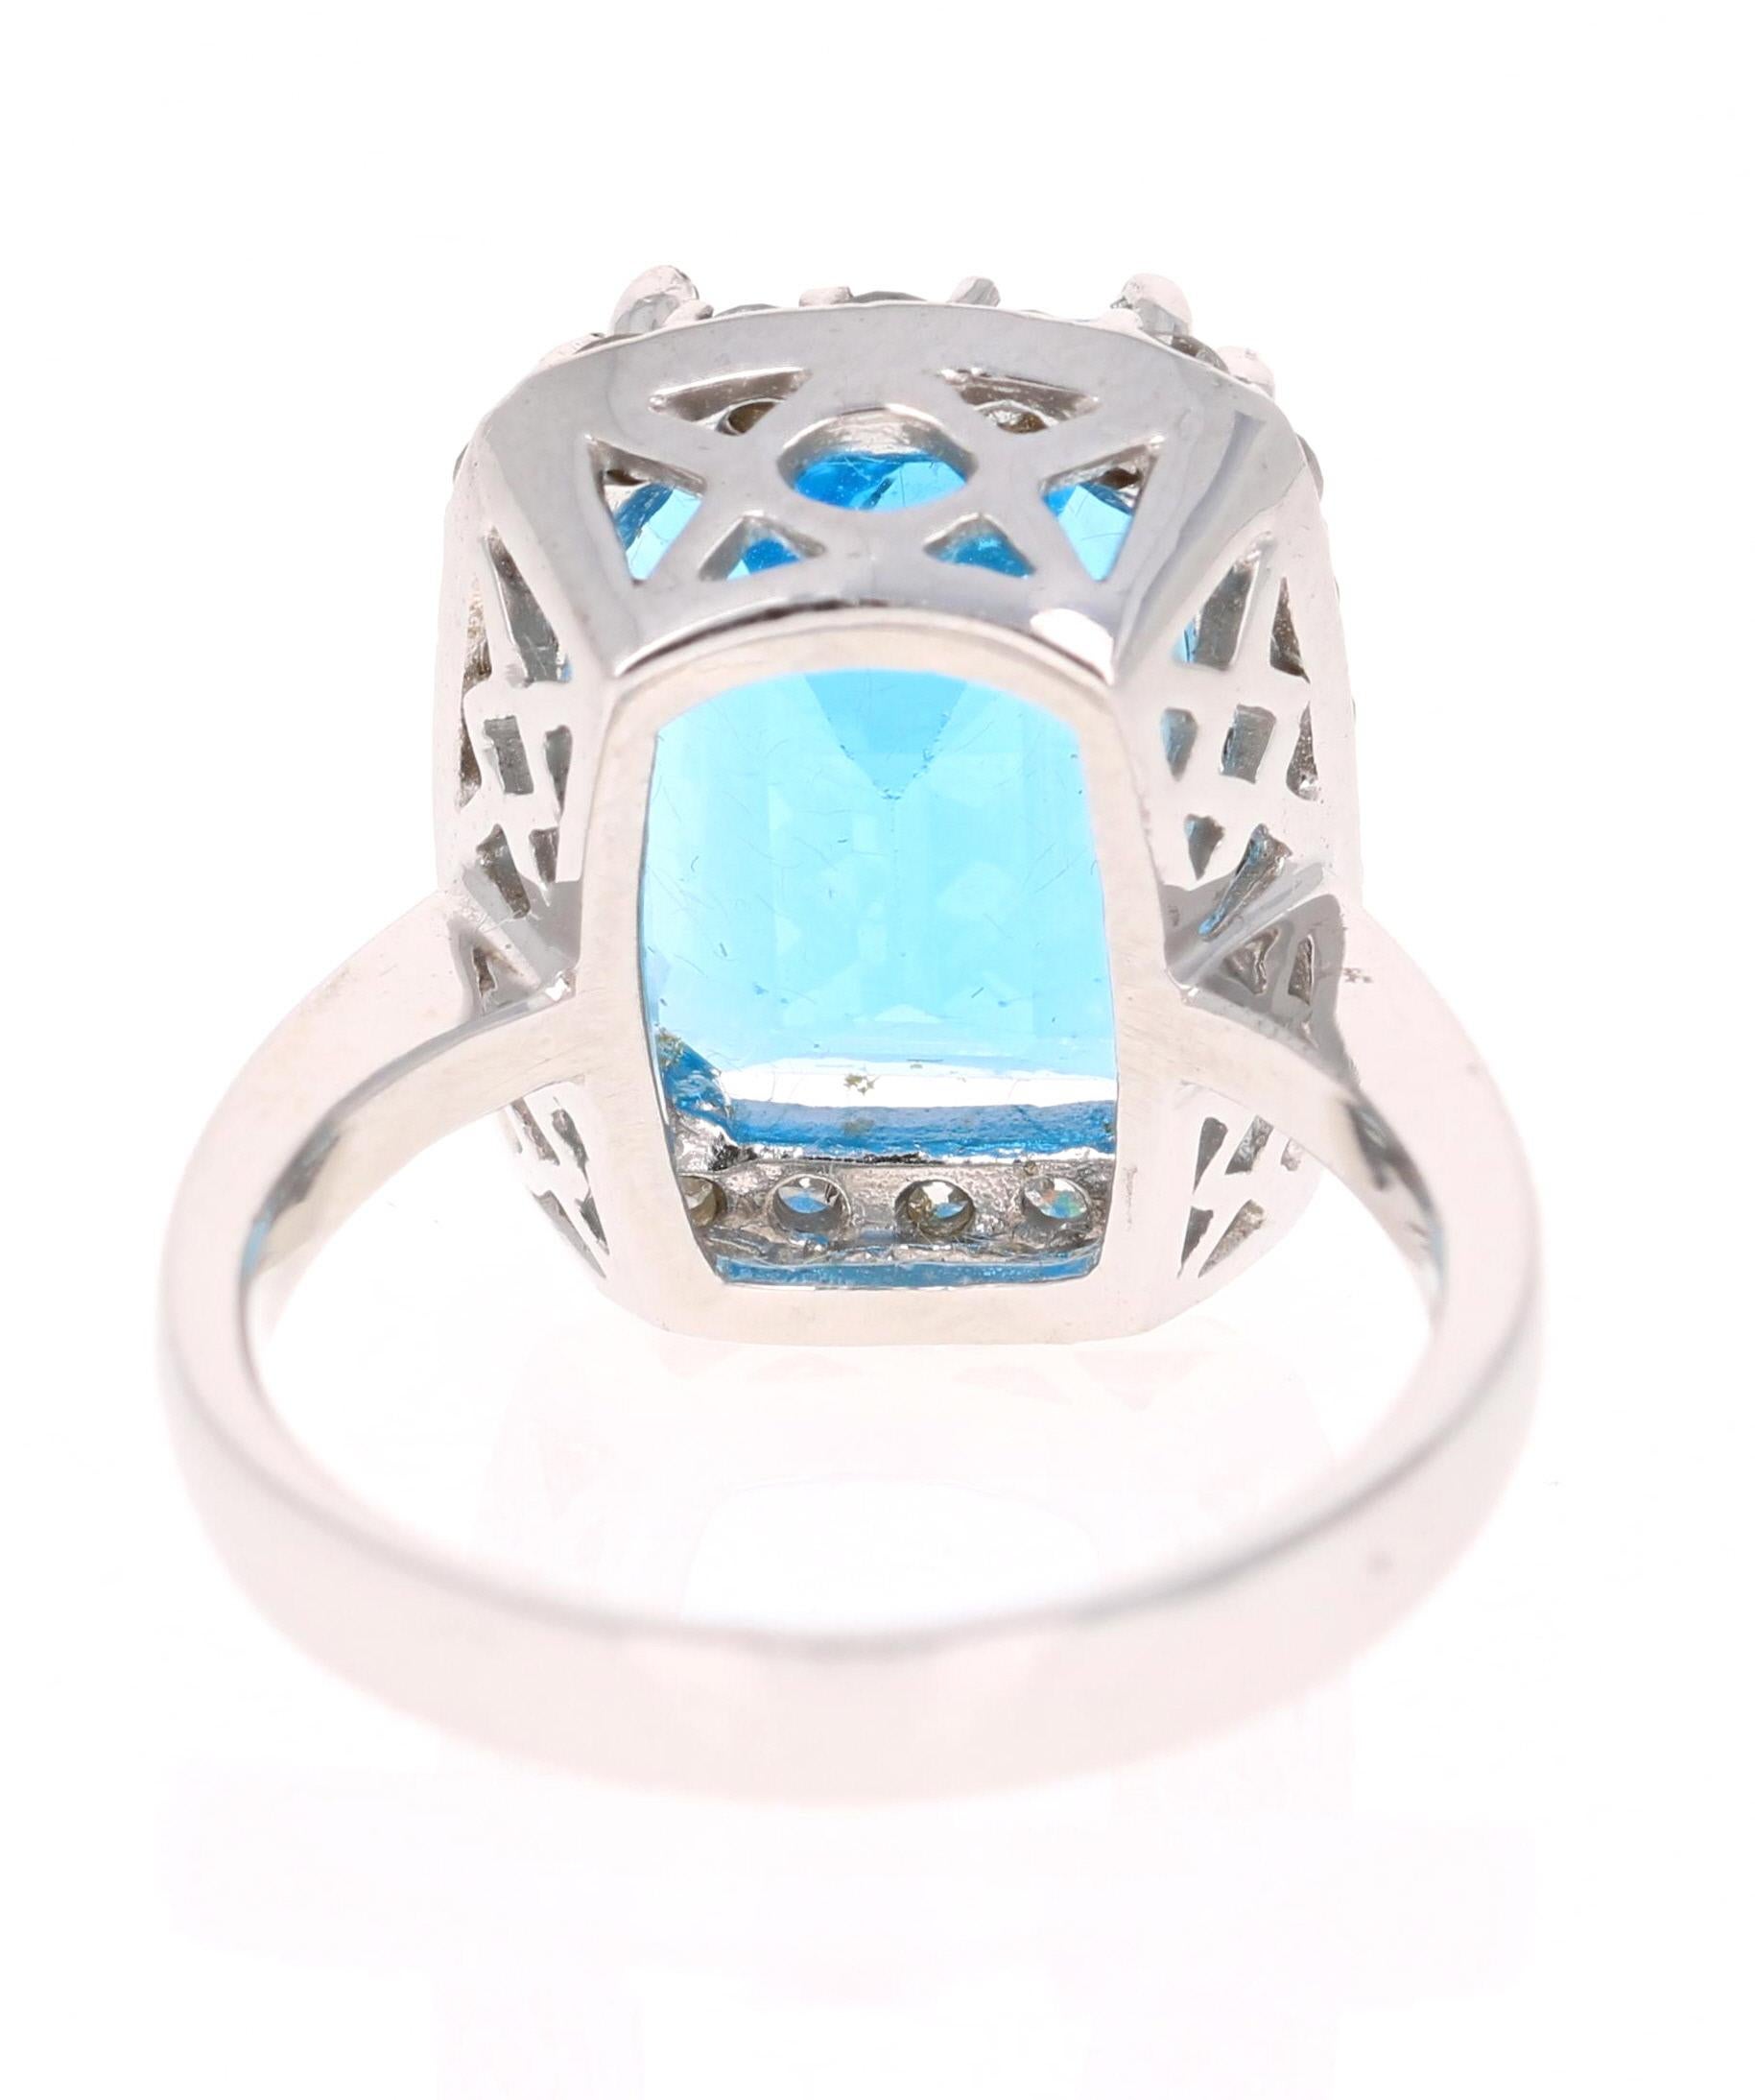 Contemporary 9.88 Carat Blue Topaz Diamond White Gold Cocktail Ring For Sale